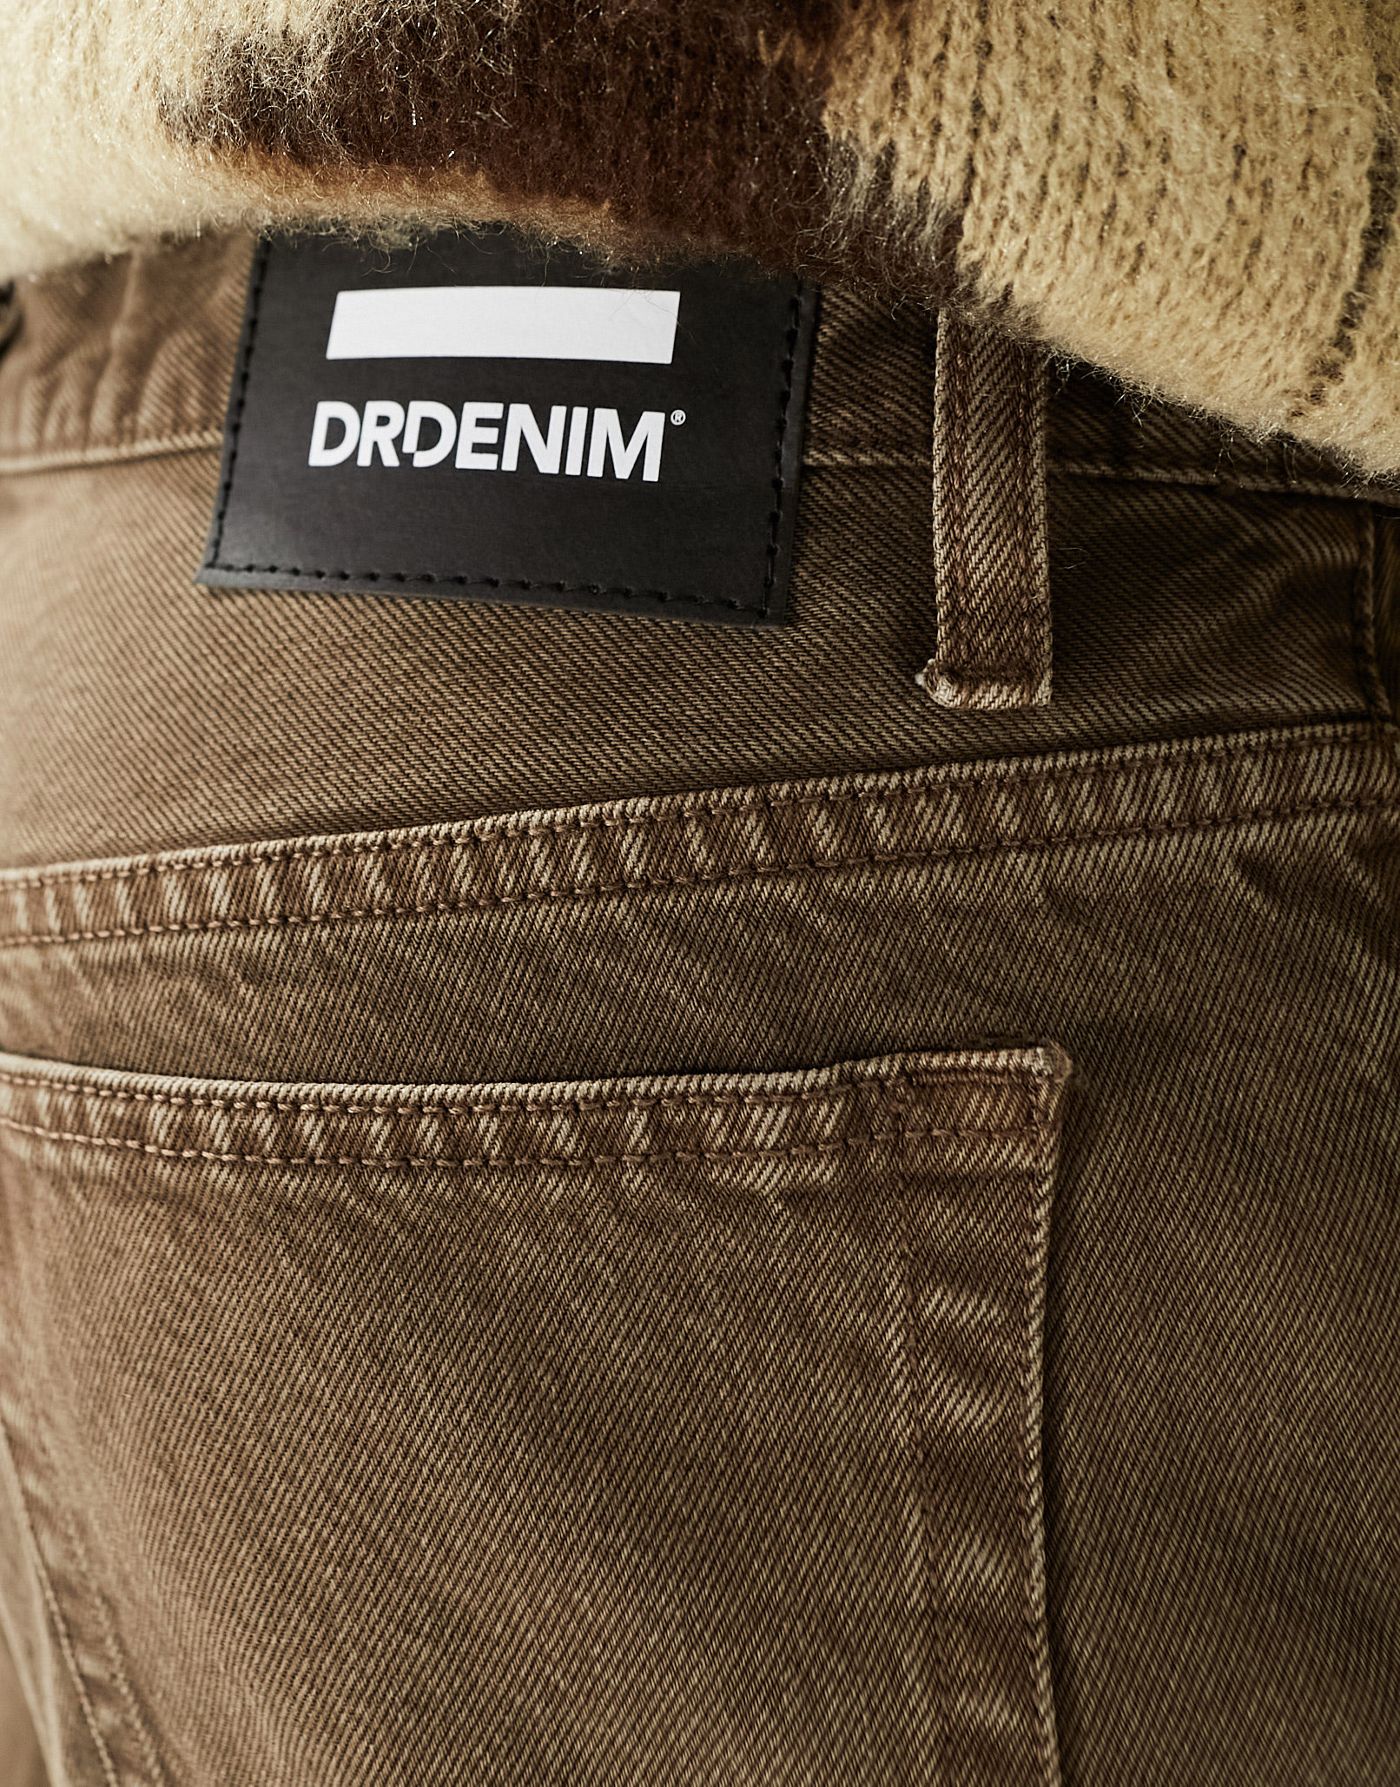 Dr Denim Dash regular fit straight leg jeans in washed chocolate brown